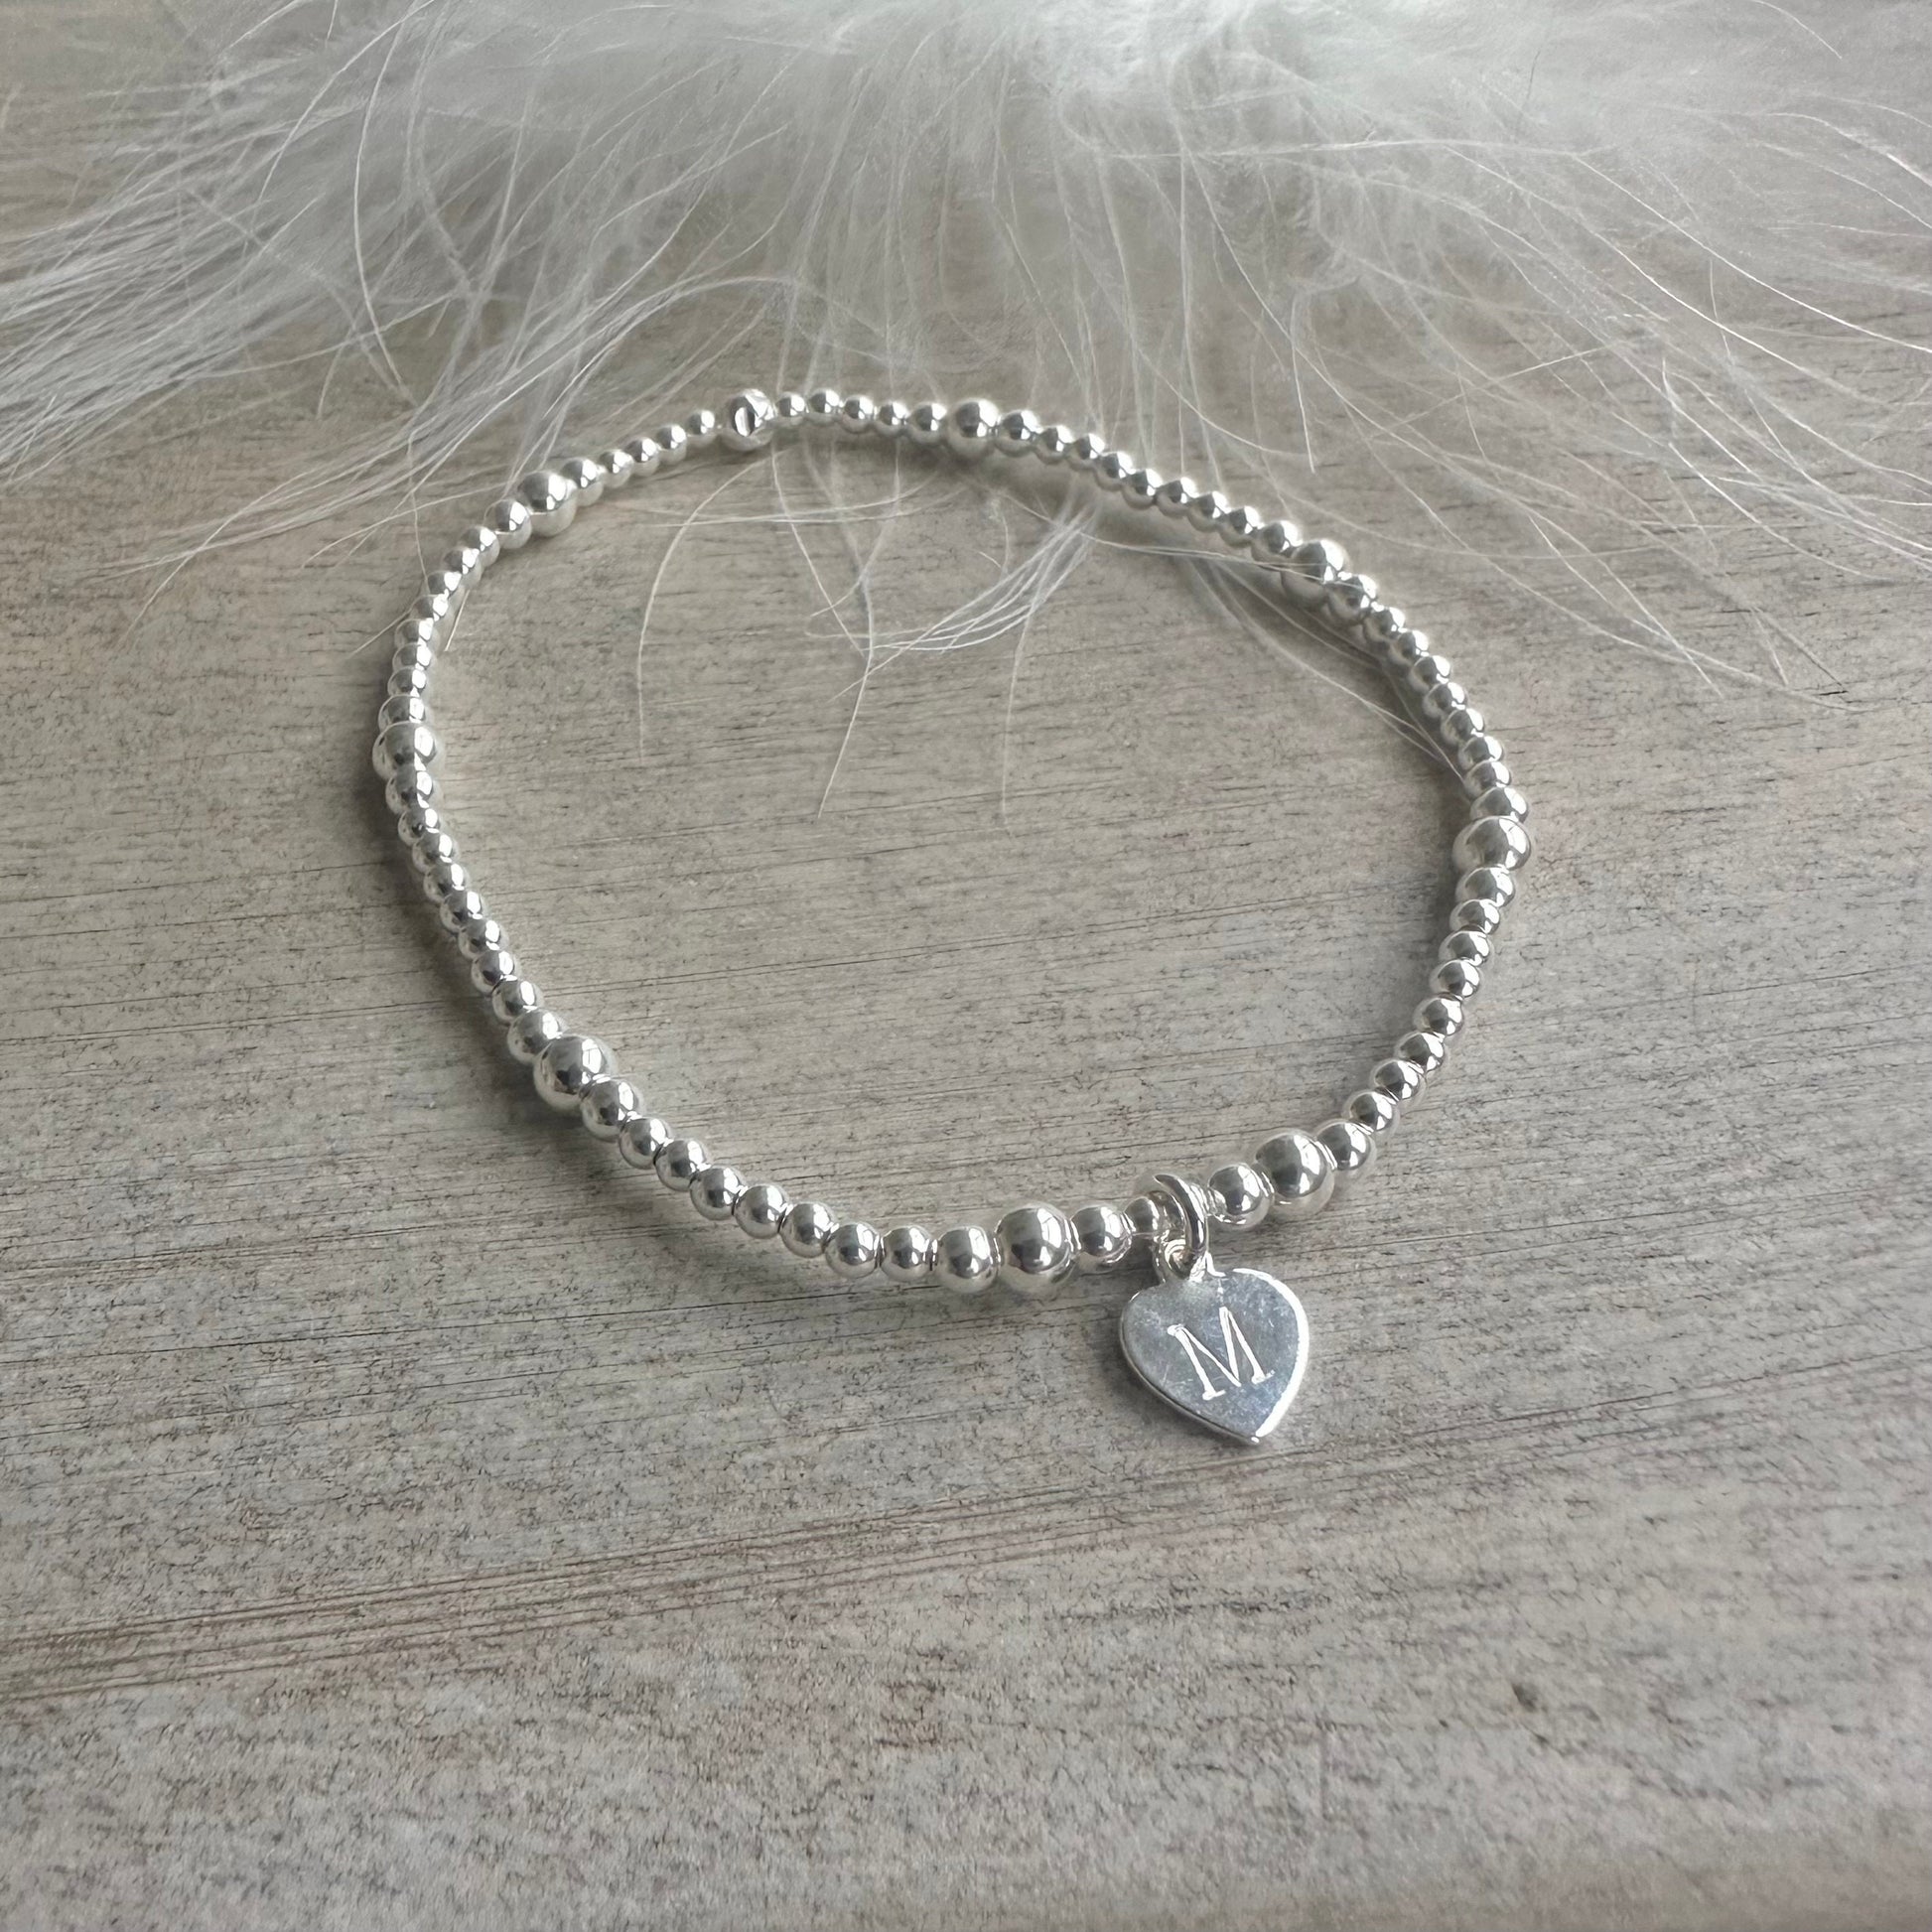 Stretchy Initial Letter Charm Bracelet, Dainty Layering Sterling Silver bracelet with heart